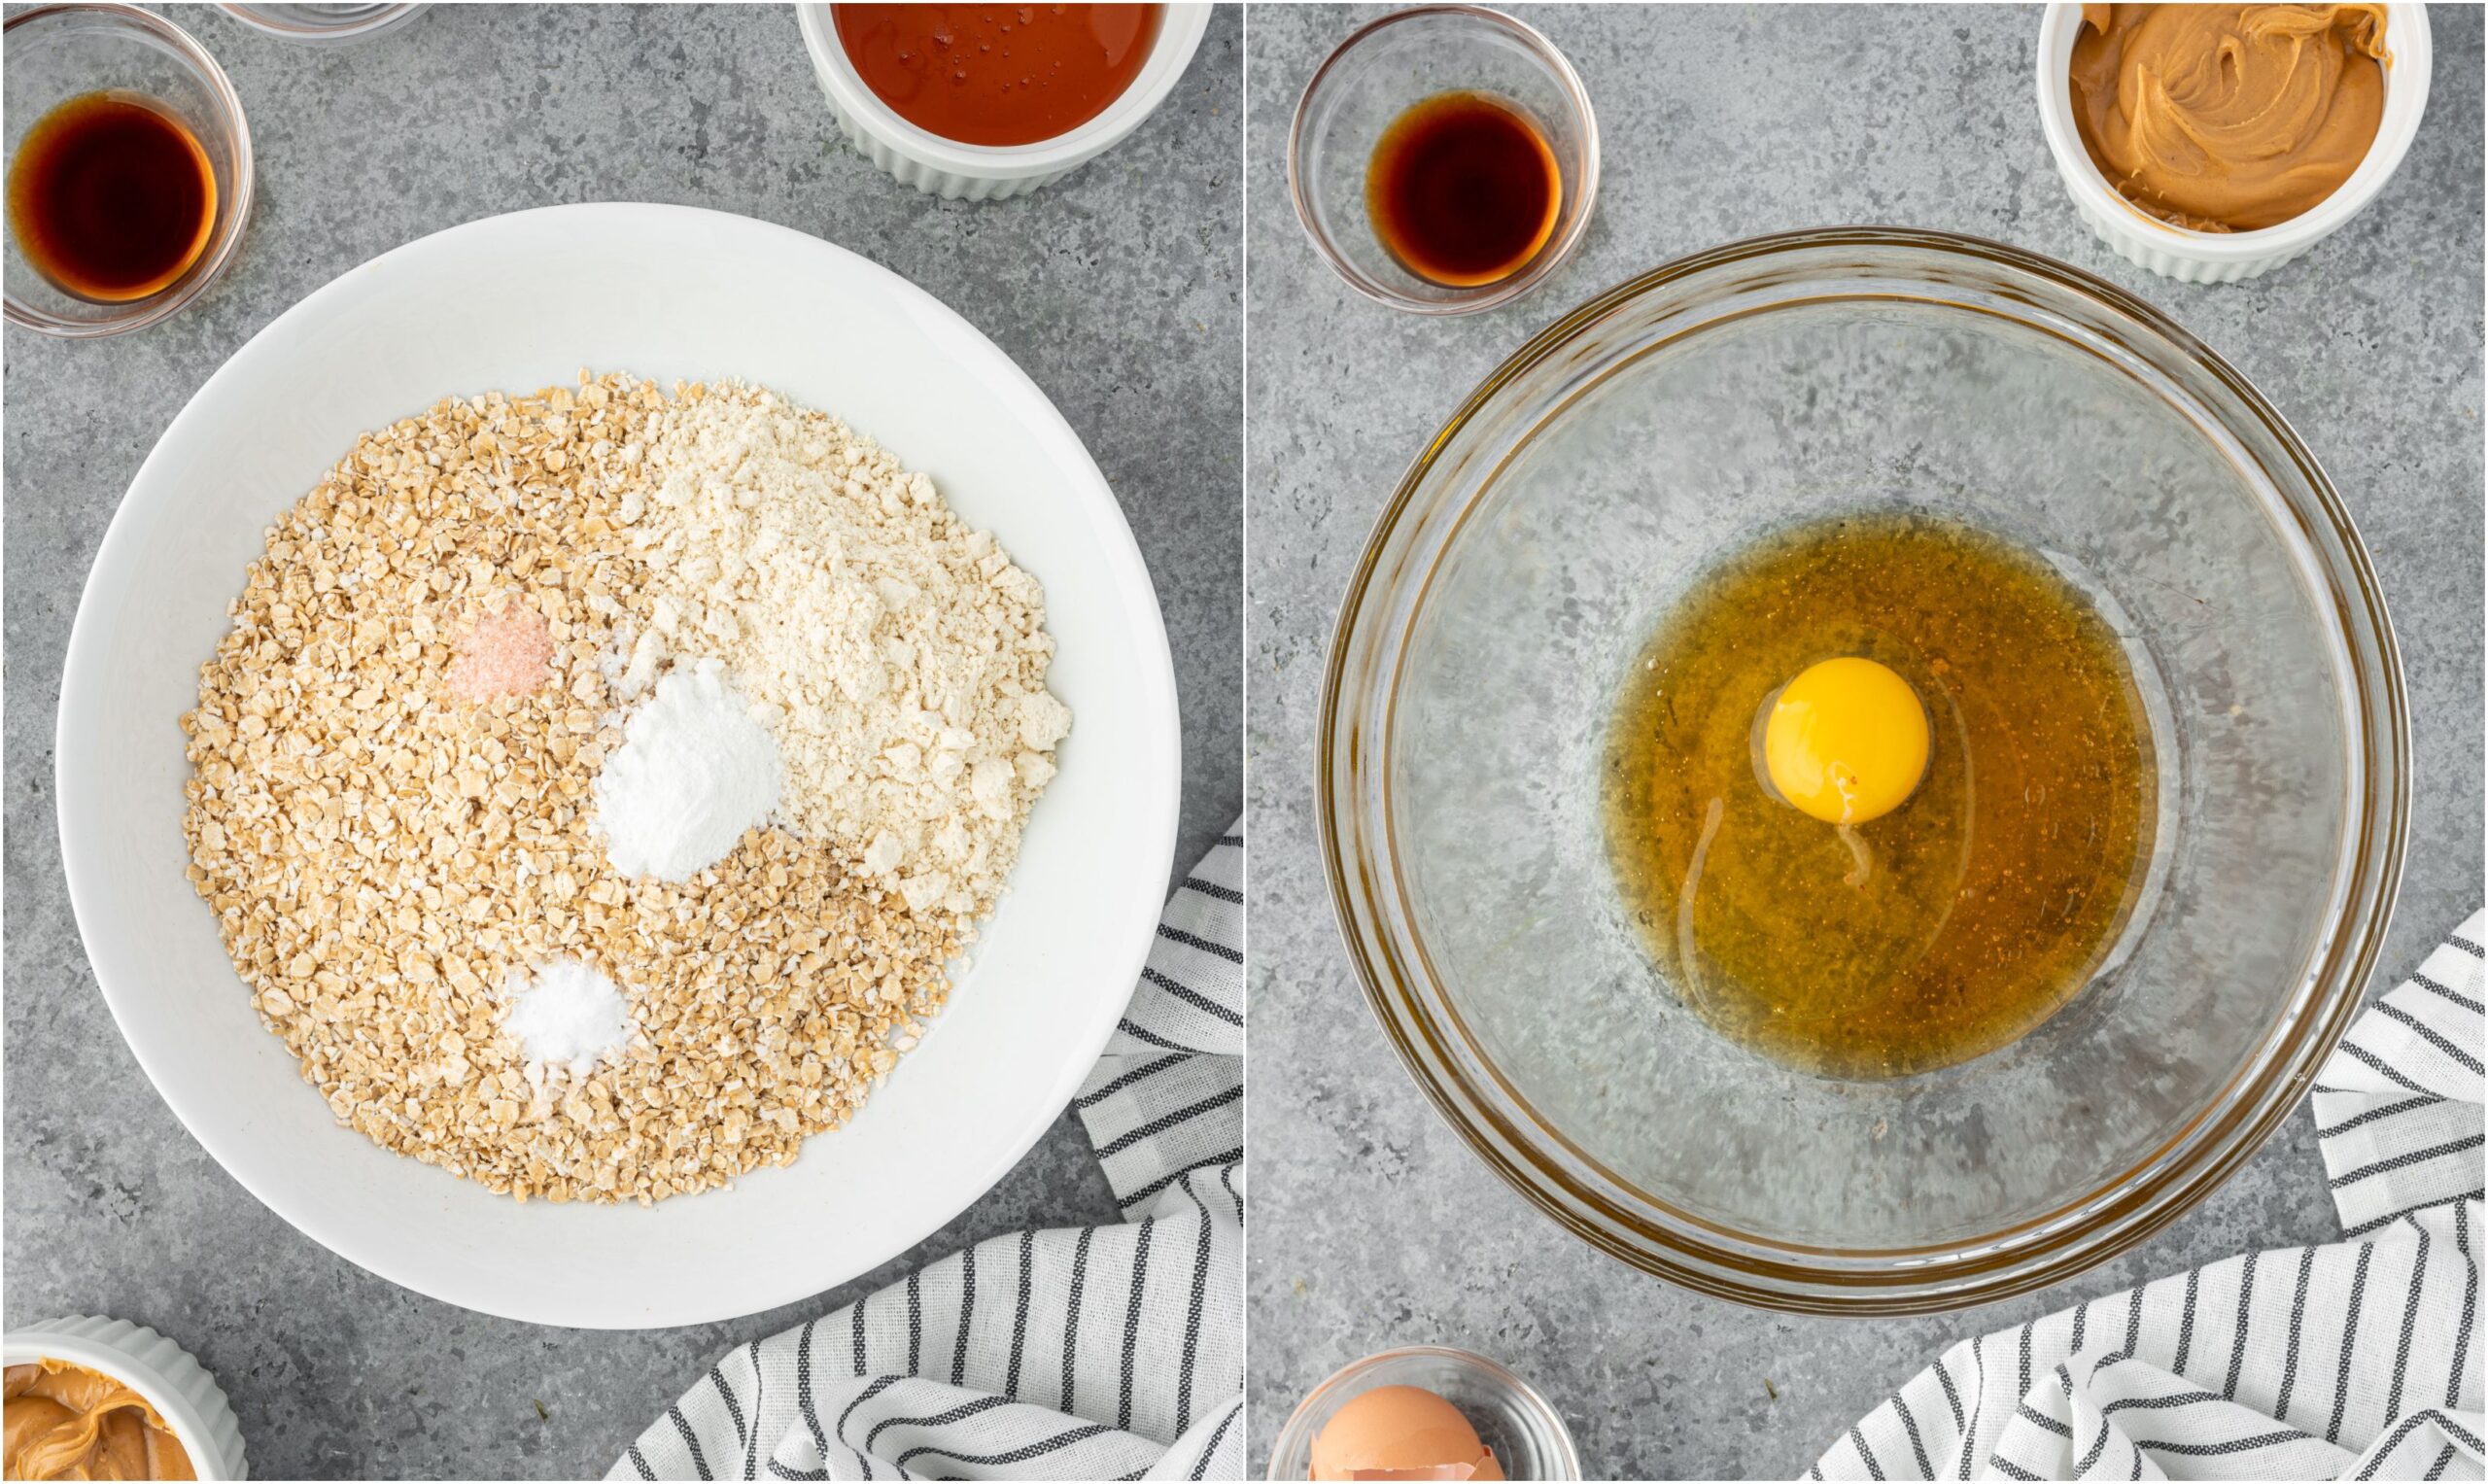 Mixing dry ingredients in one bowl and the egg and honey in another bowl.